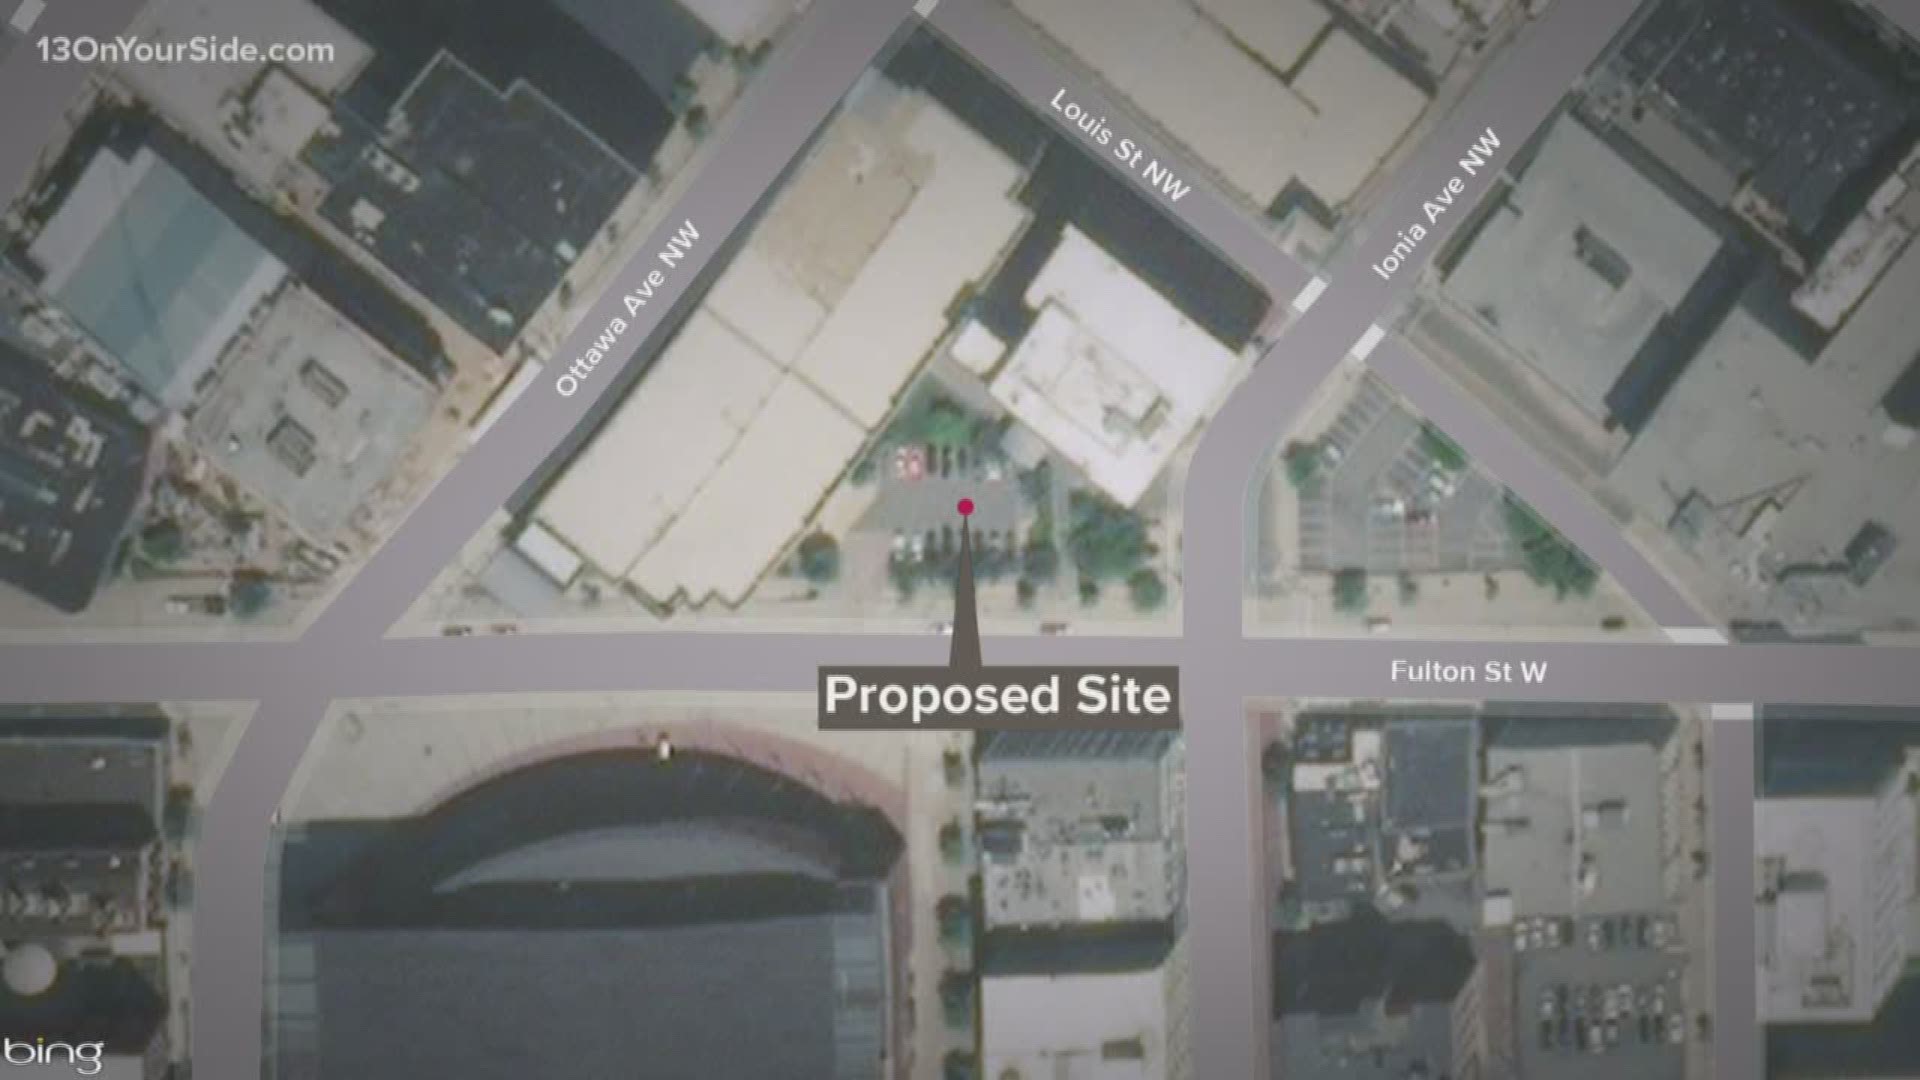 It would be at the northwest corner of Ionia Avenue and Fulton Street and include retail space and business or residential developments at the top of the ramp.